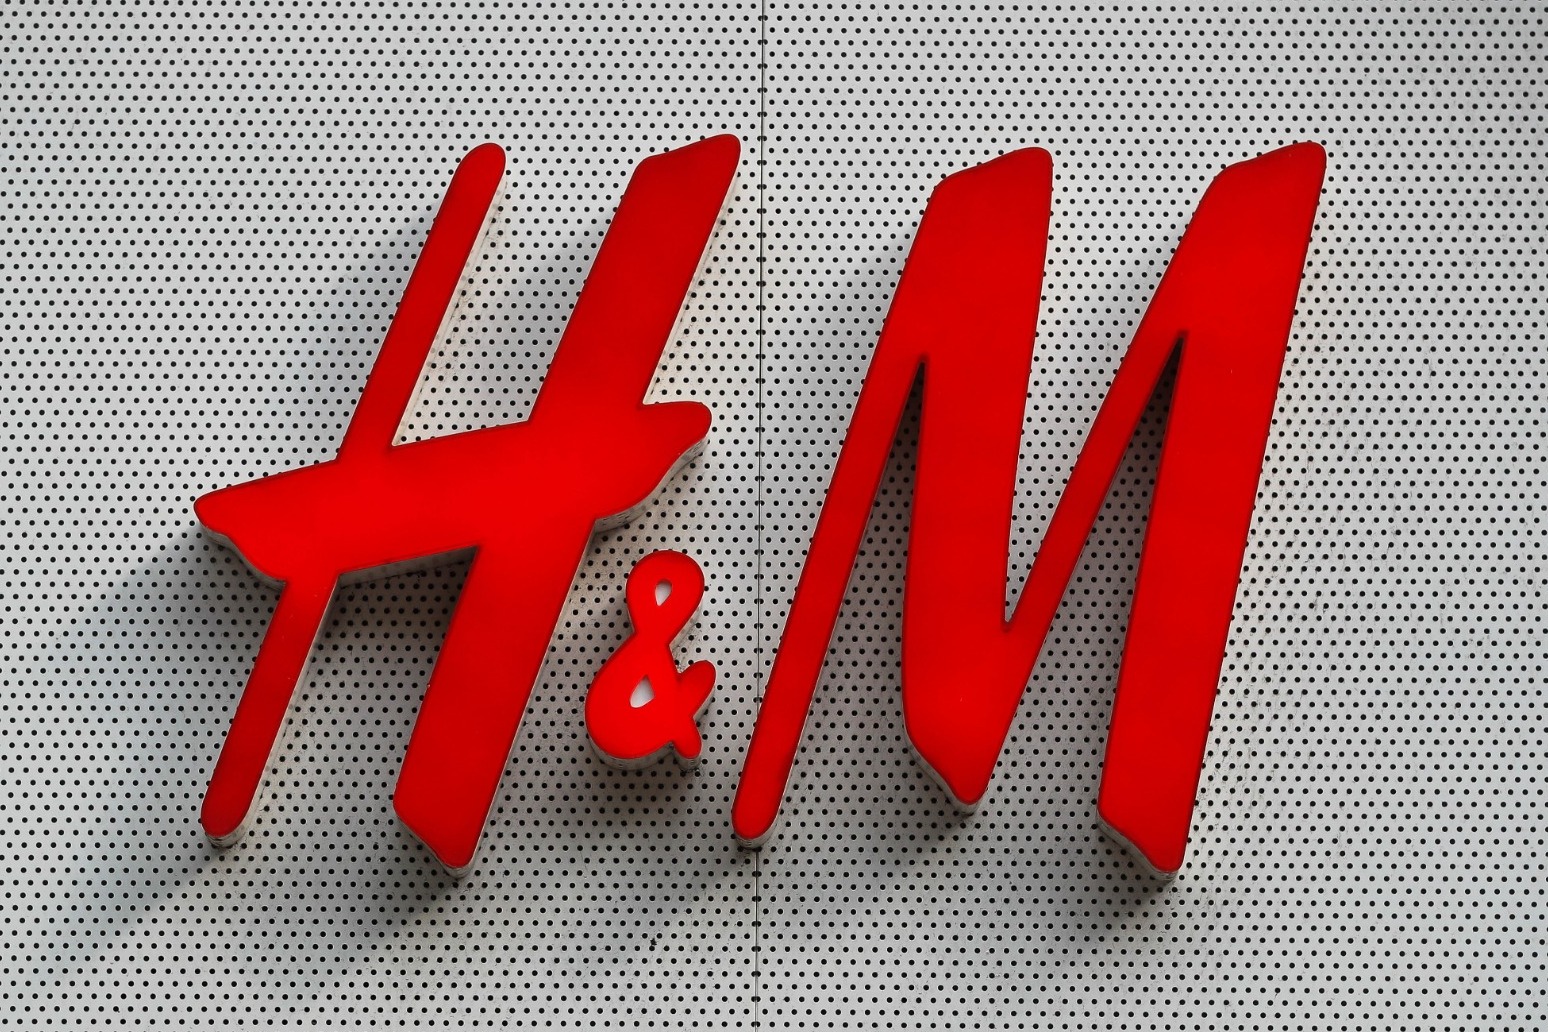 Retail giant H&M posts higher quarterly sales but shares slip 